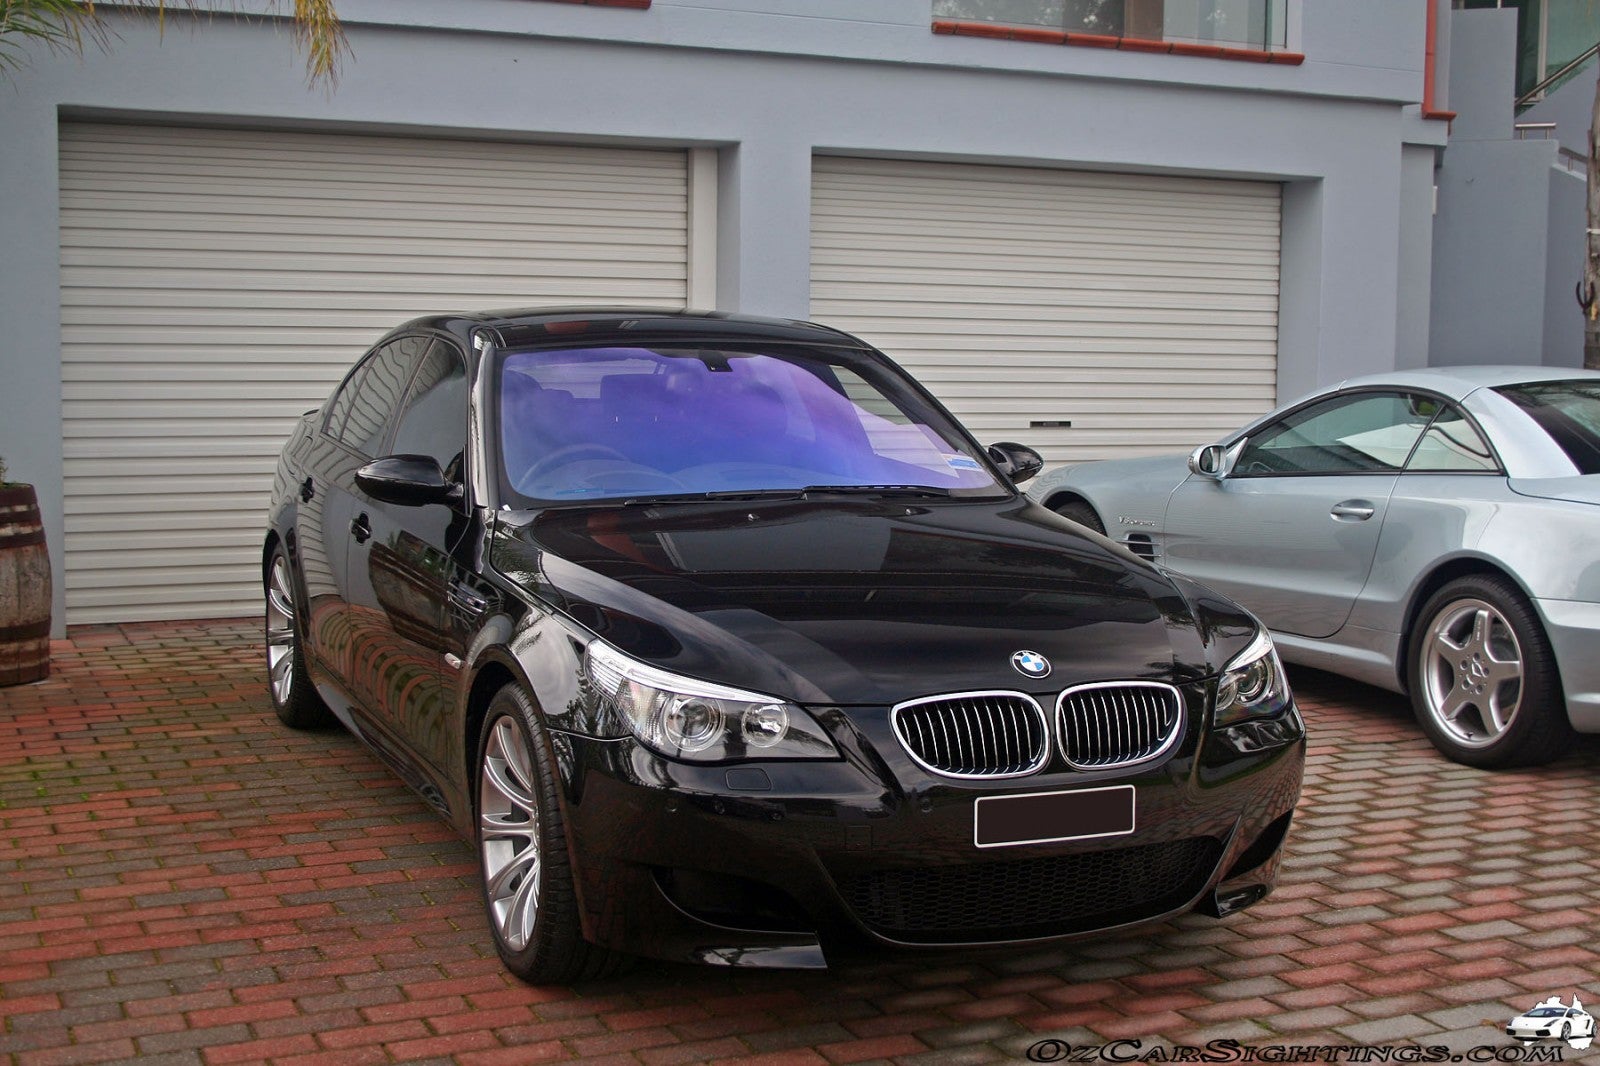 Modified BMW E60 M5 Turbocharged Picture #28027 | 600x400 Wallpaper